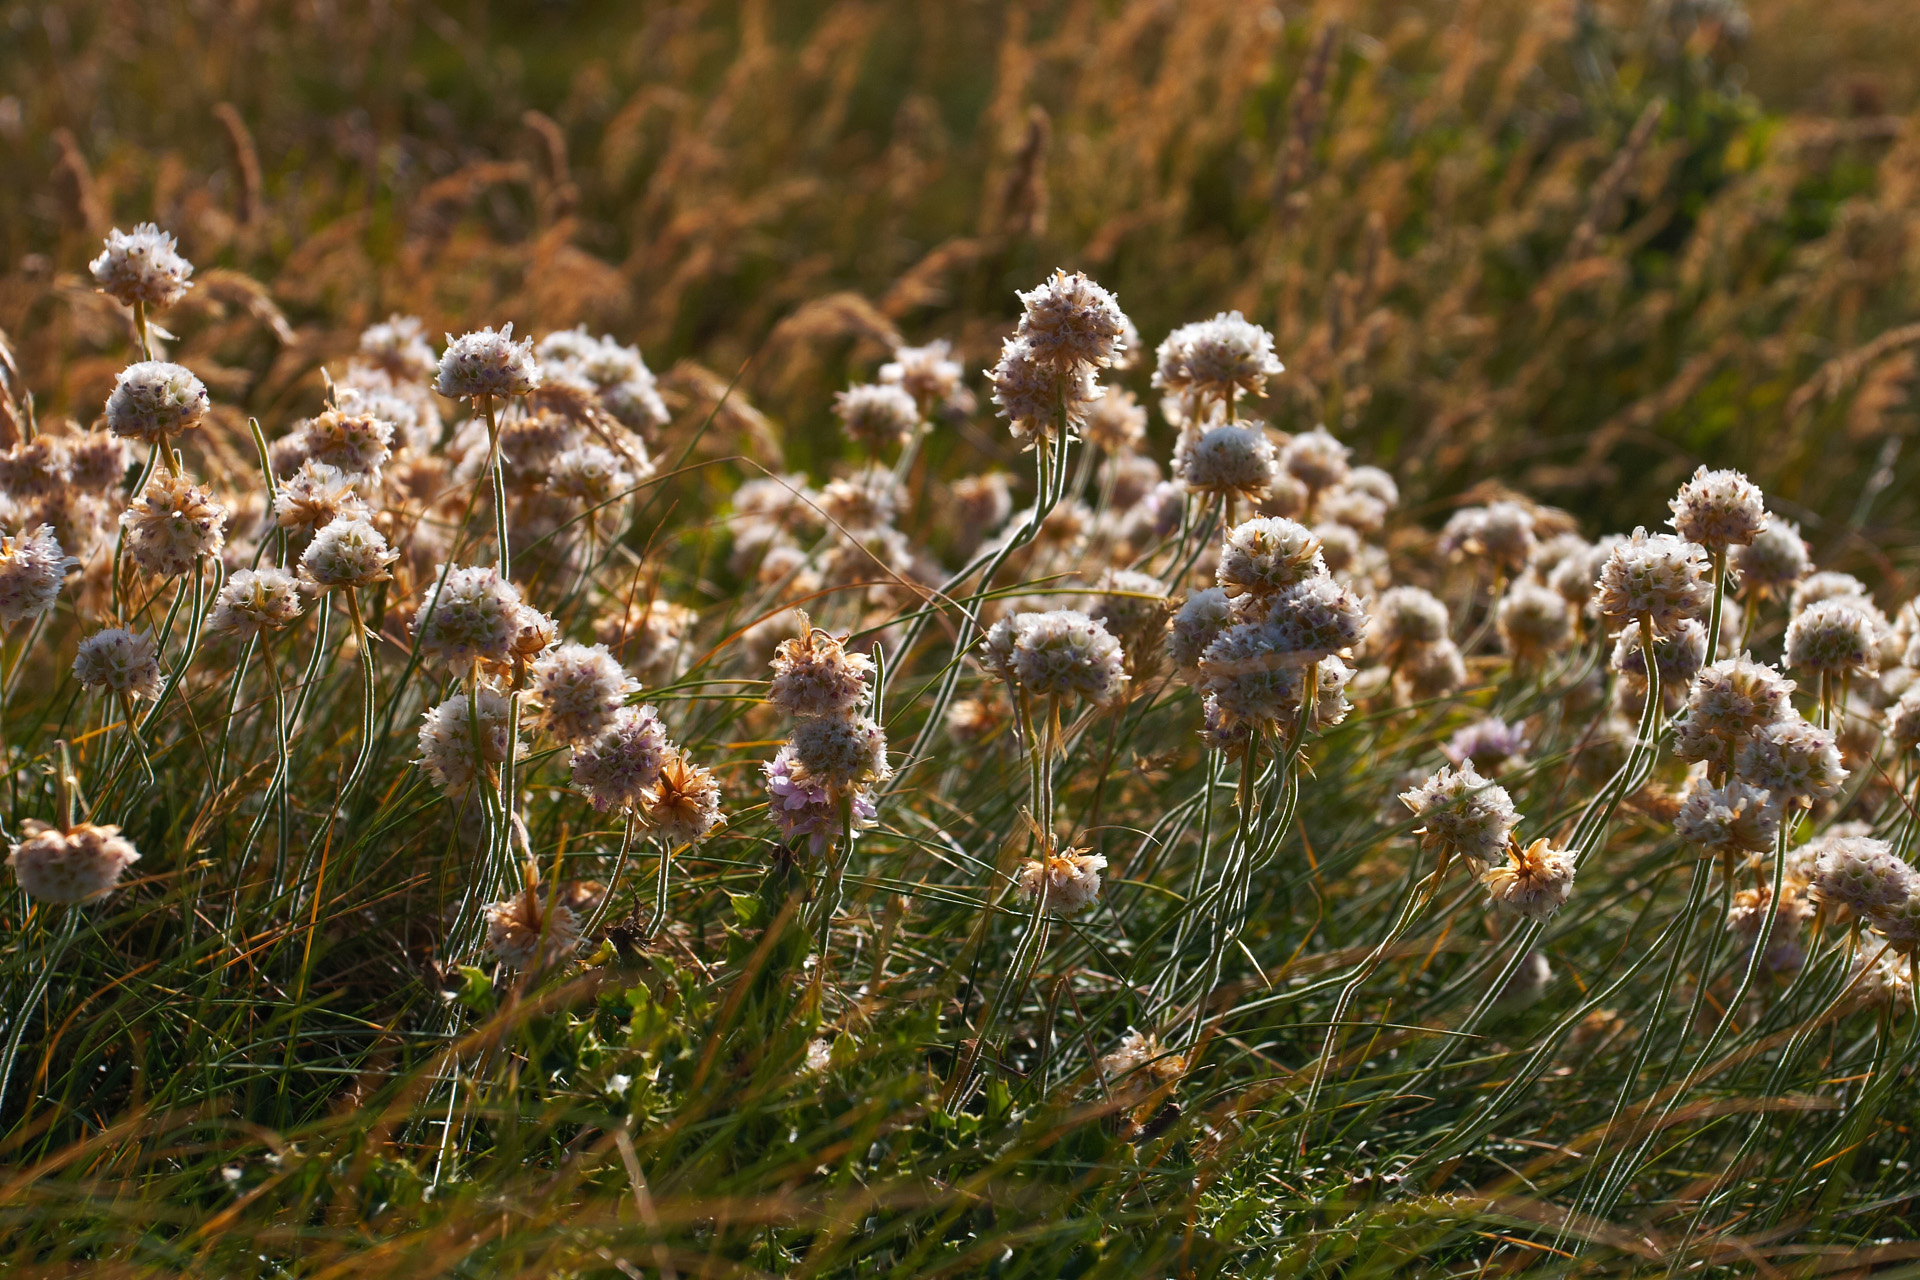 Thrift in the late afternoon sunlight atop the cliffs at Bedruth